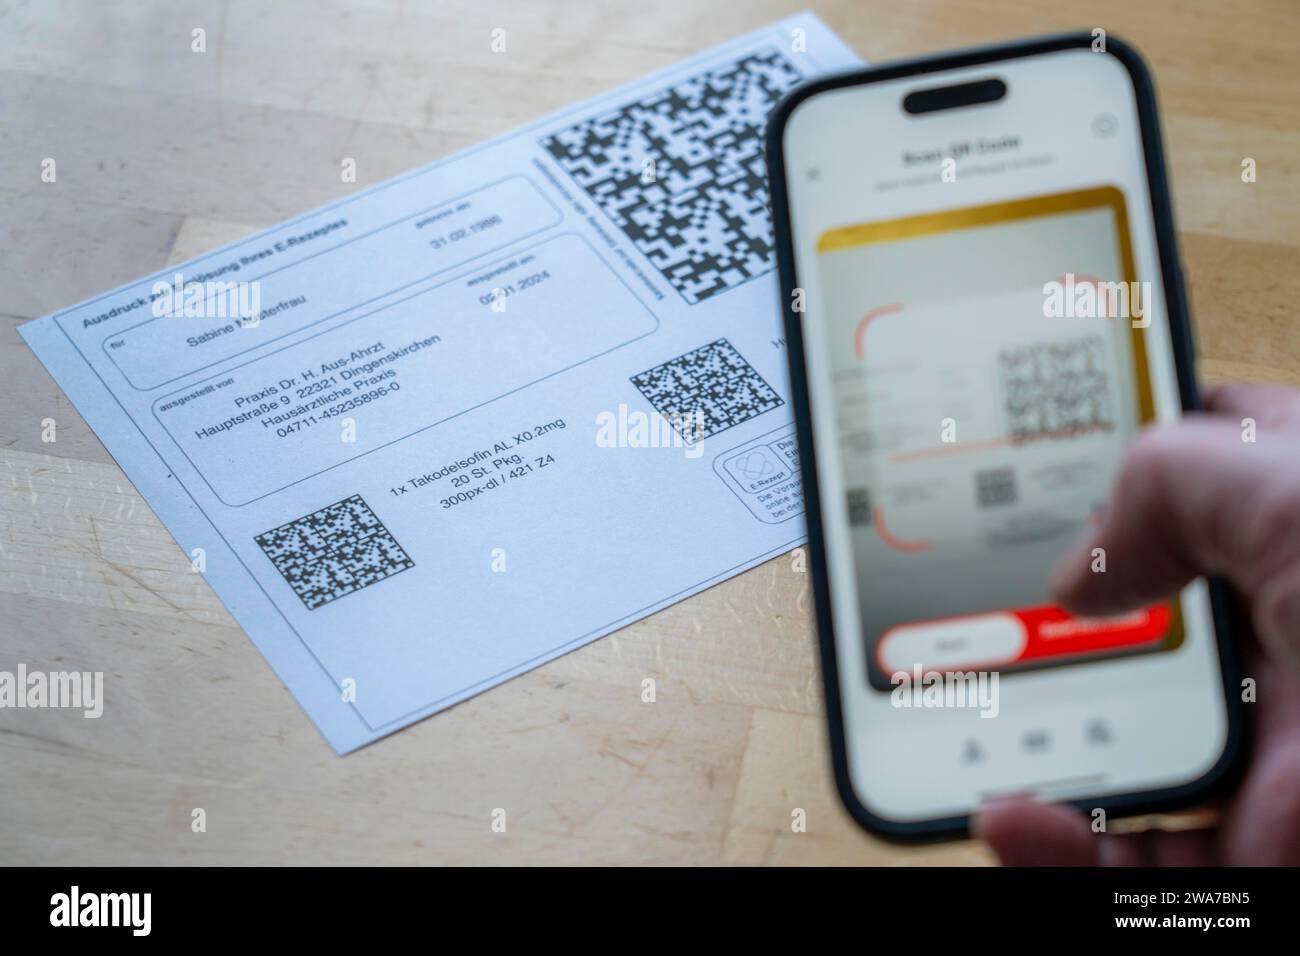 Symbolic image of an e-prescription, prescription issued by a doctor, with QR code, is scanned using a mobile phone and a special app, the code is the Stock Photo